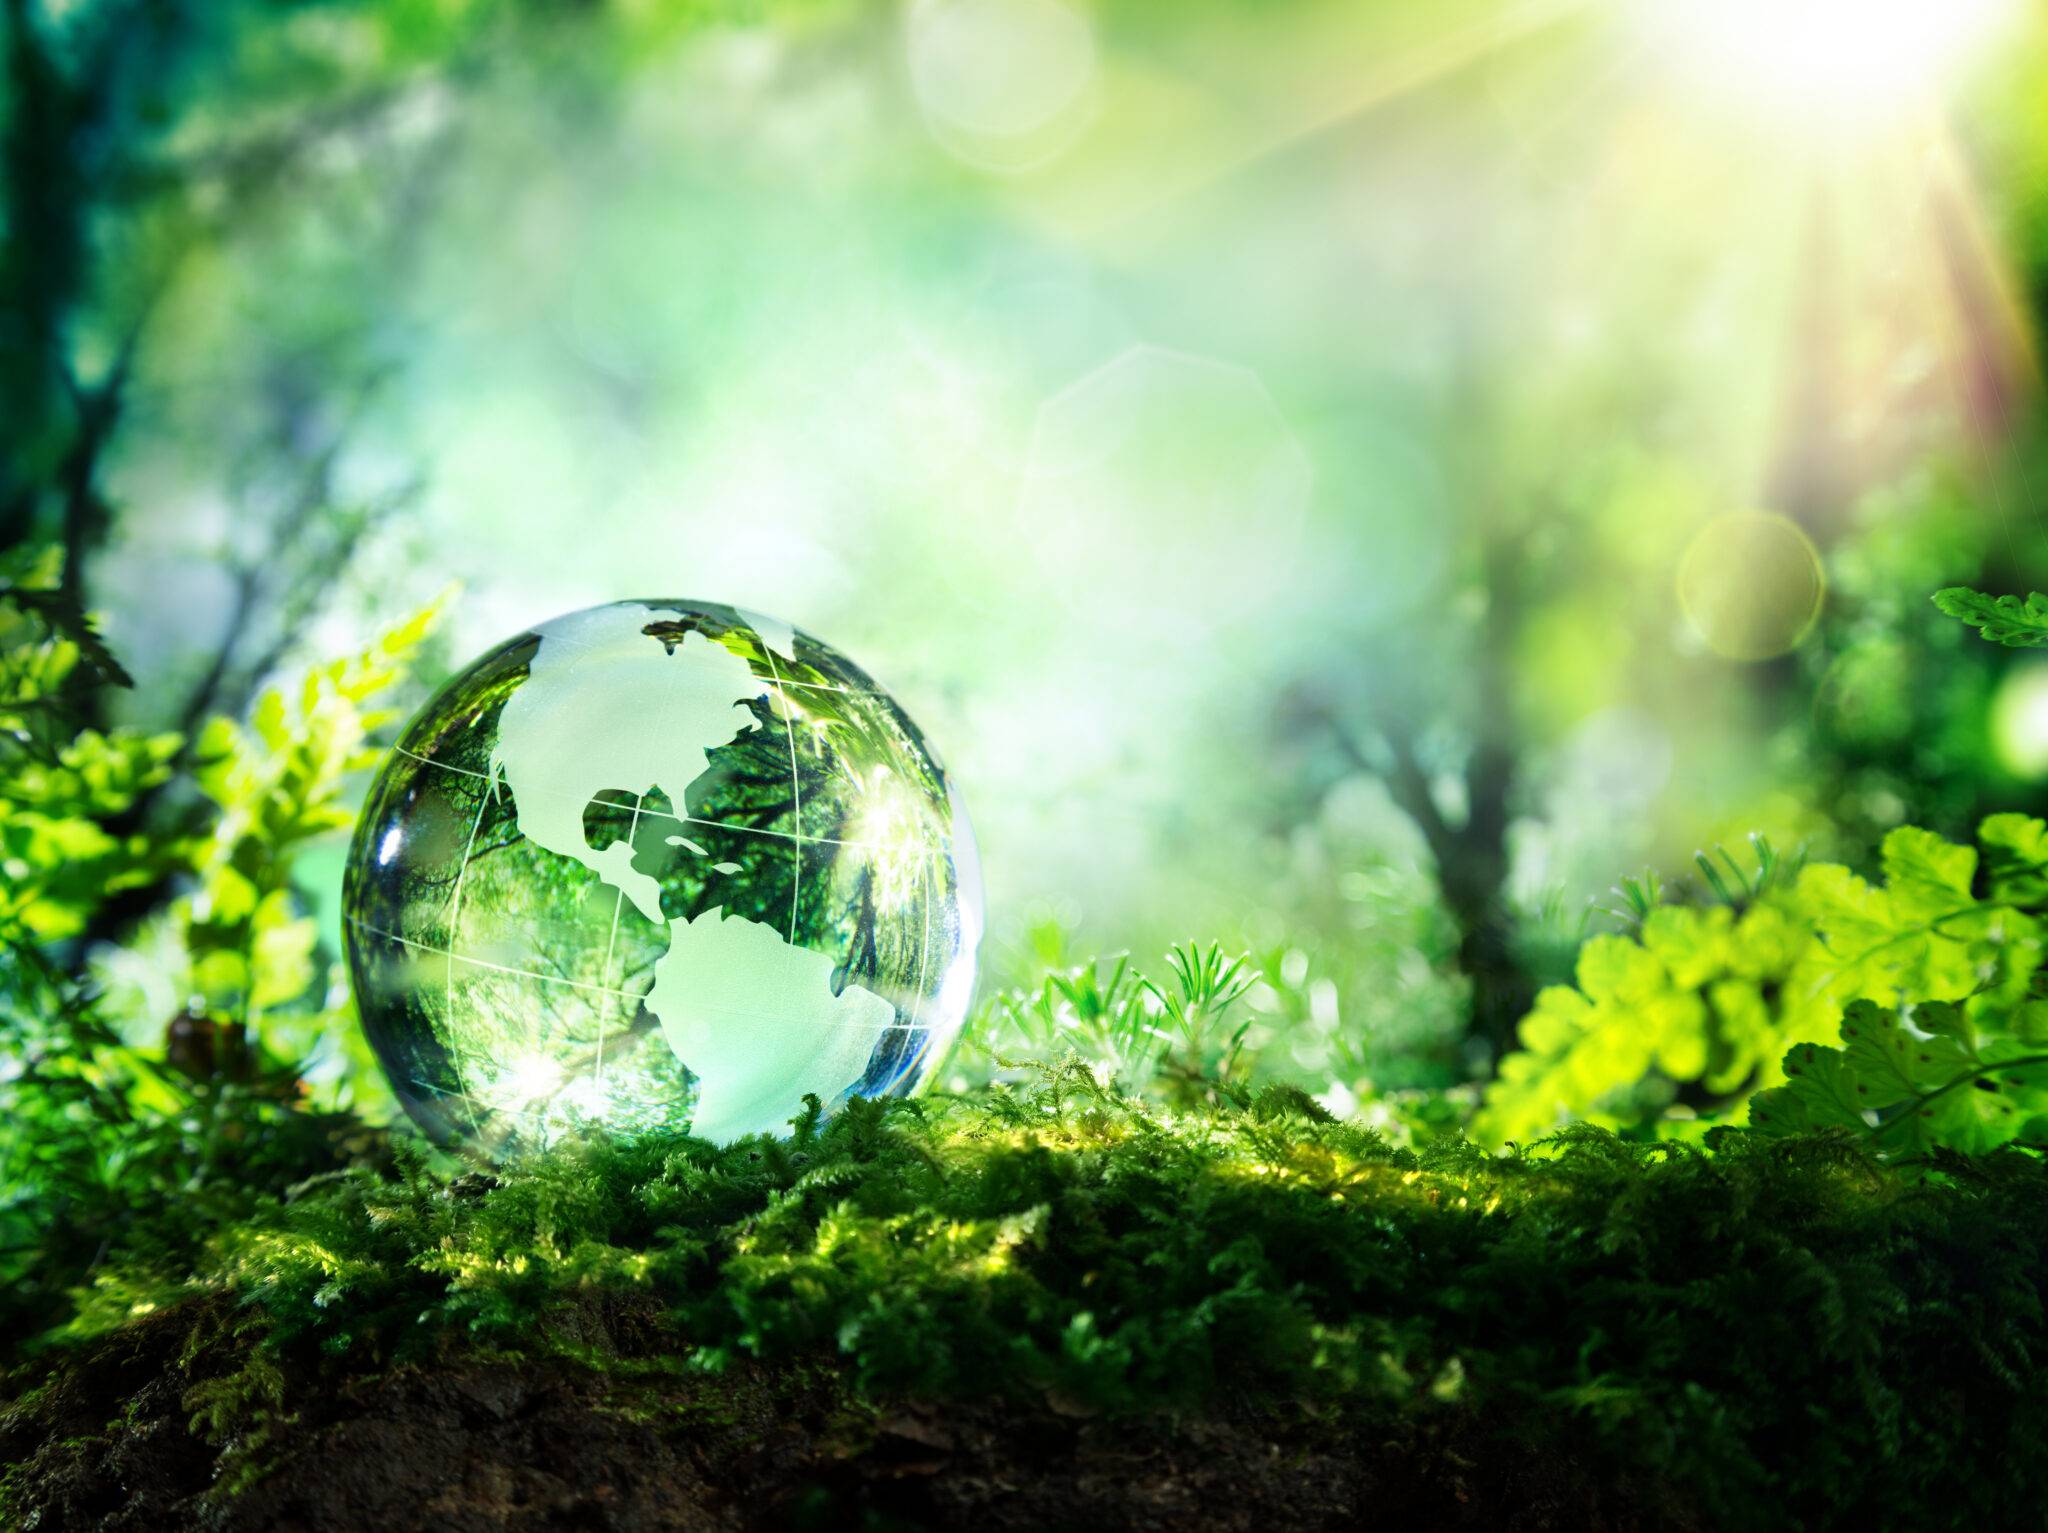 Envirotainer releases annual sustainability narrative